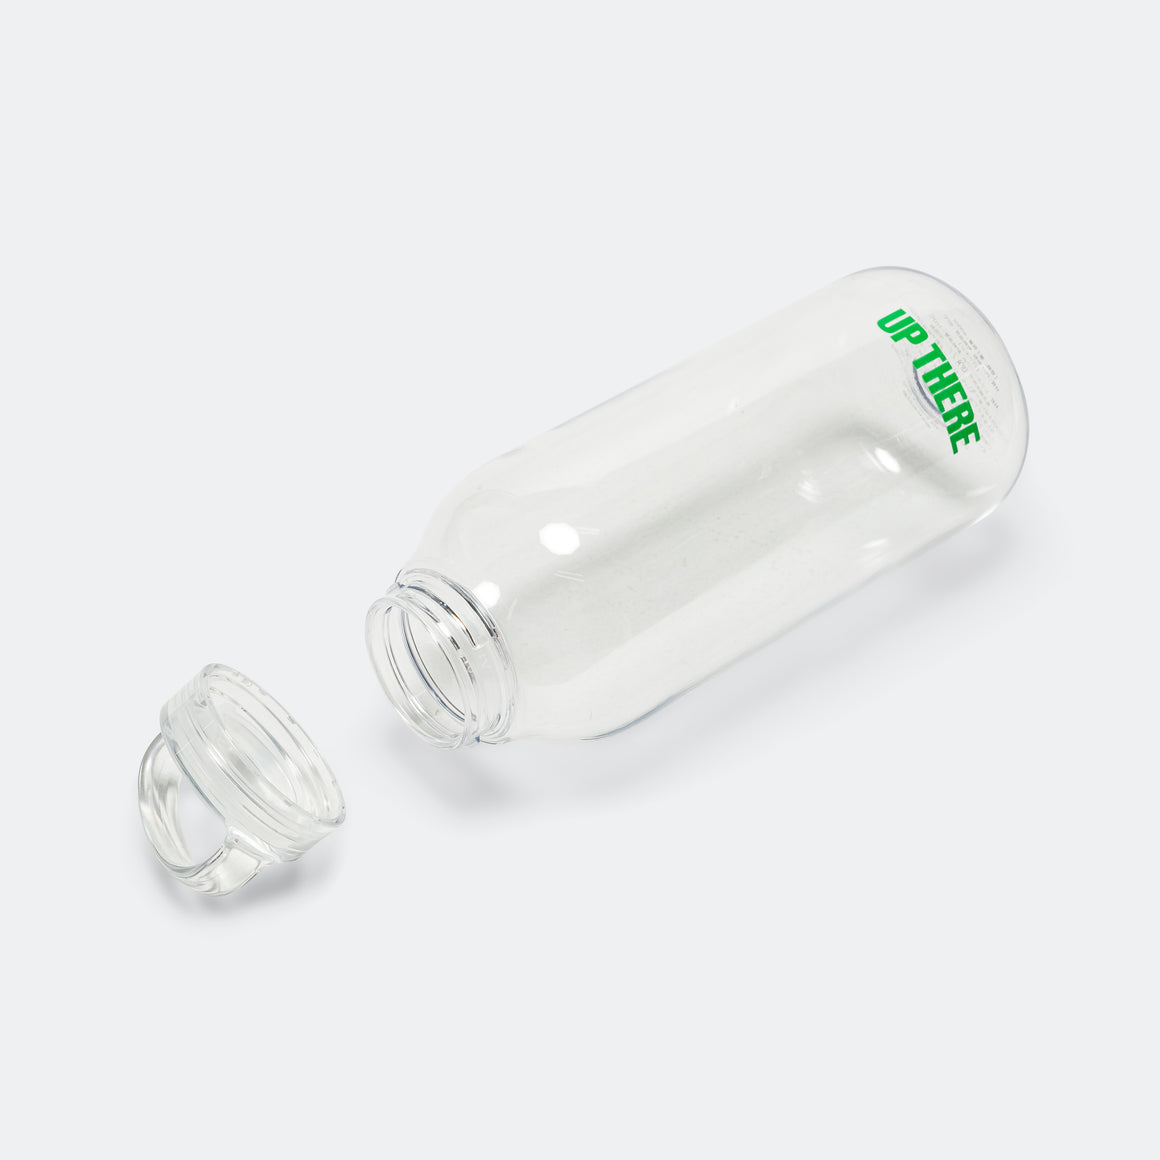 UP THERE - Kinto Logo Water Bottle - 500ml - Clear - UP THERE